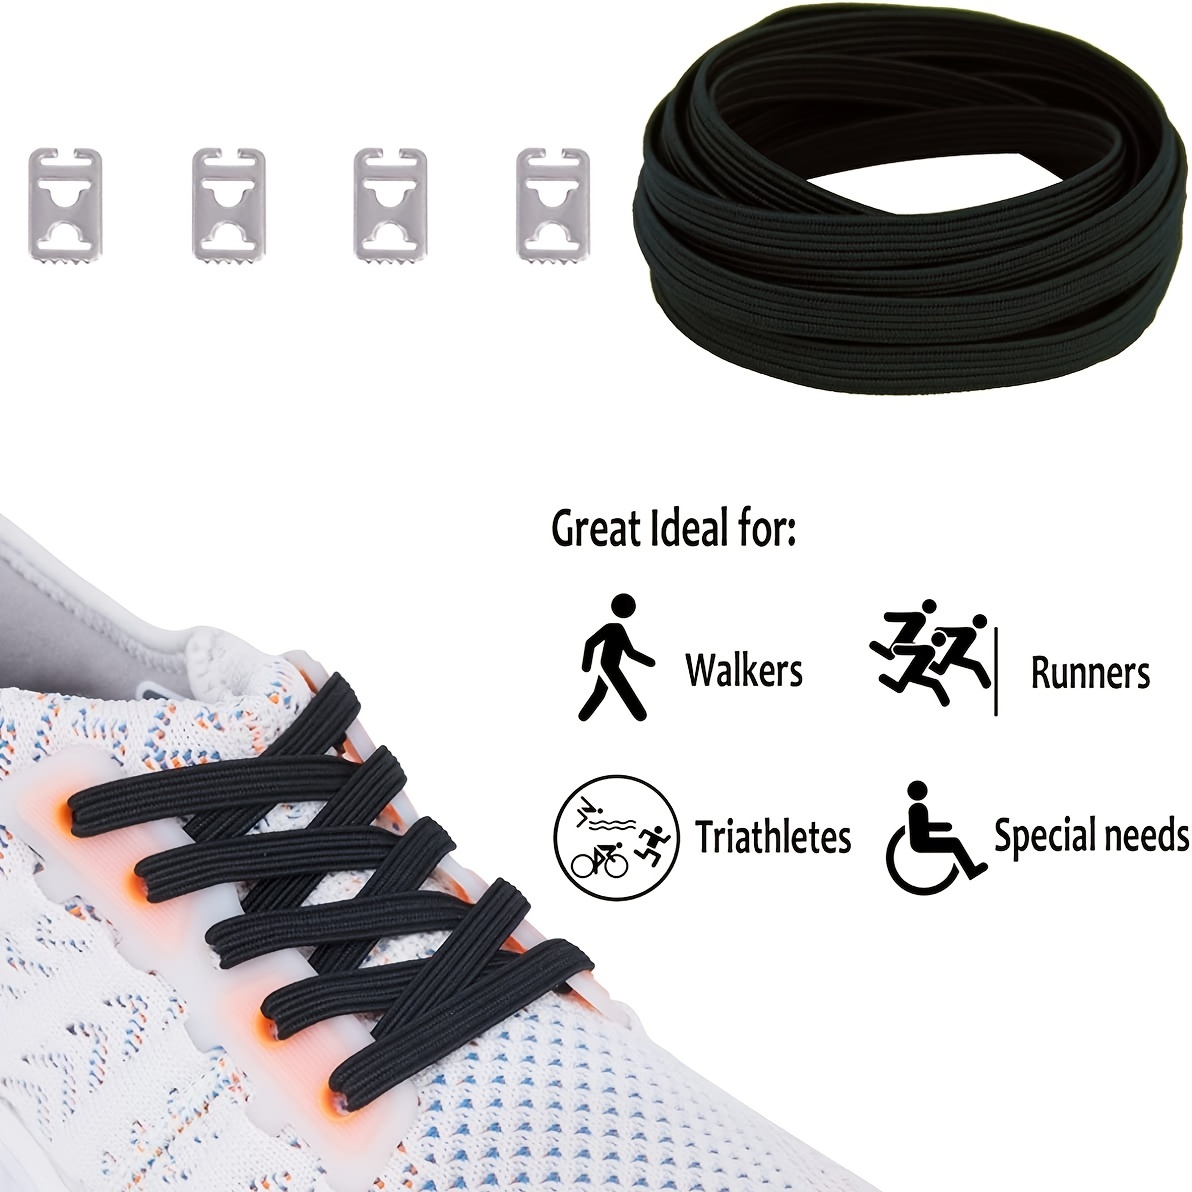 1 Pair No-Tie Shoelaces Quick And Easy Locking System Shoe Ropes Black And  White Spandex Shoelaces For Adults